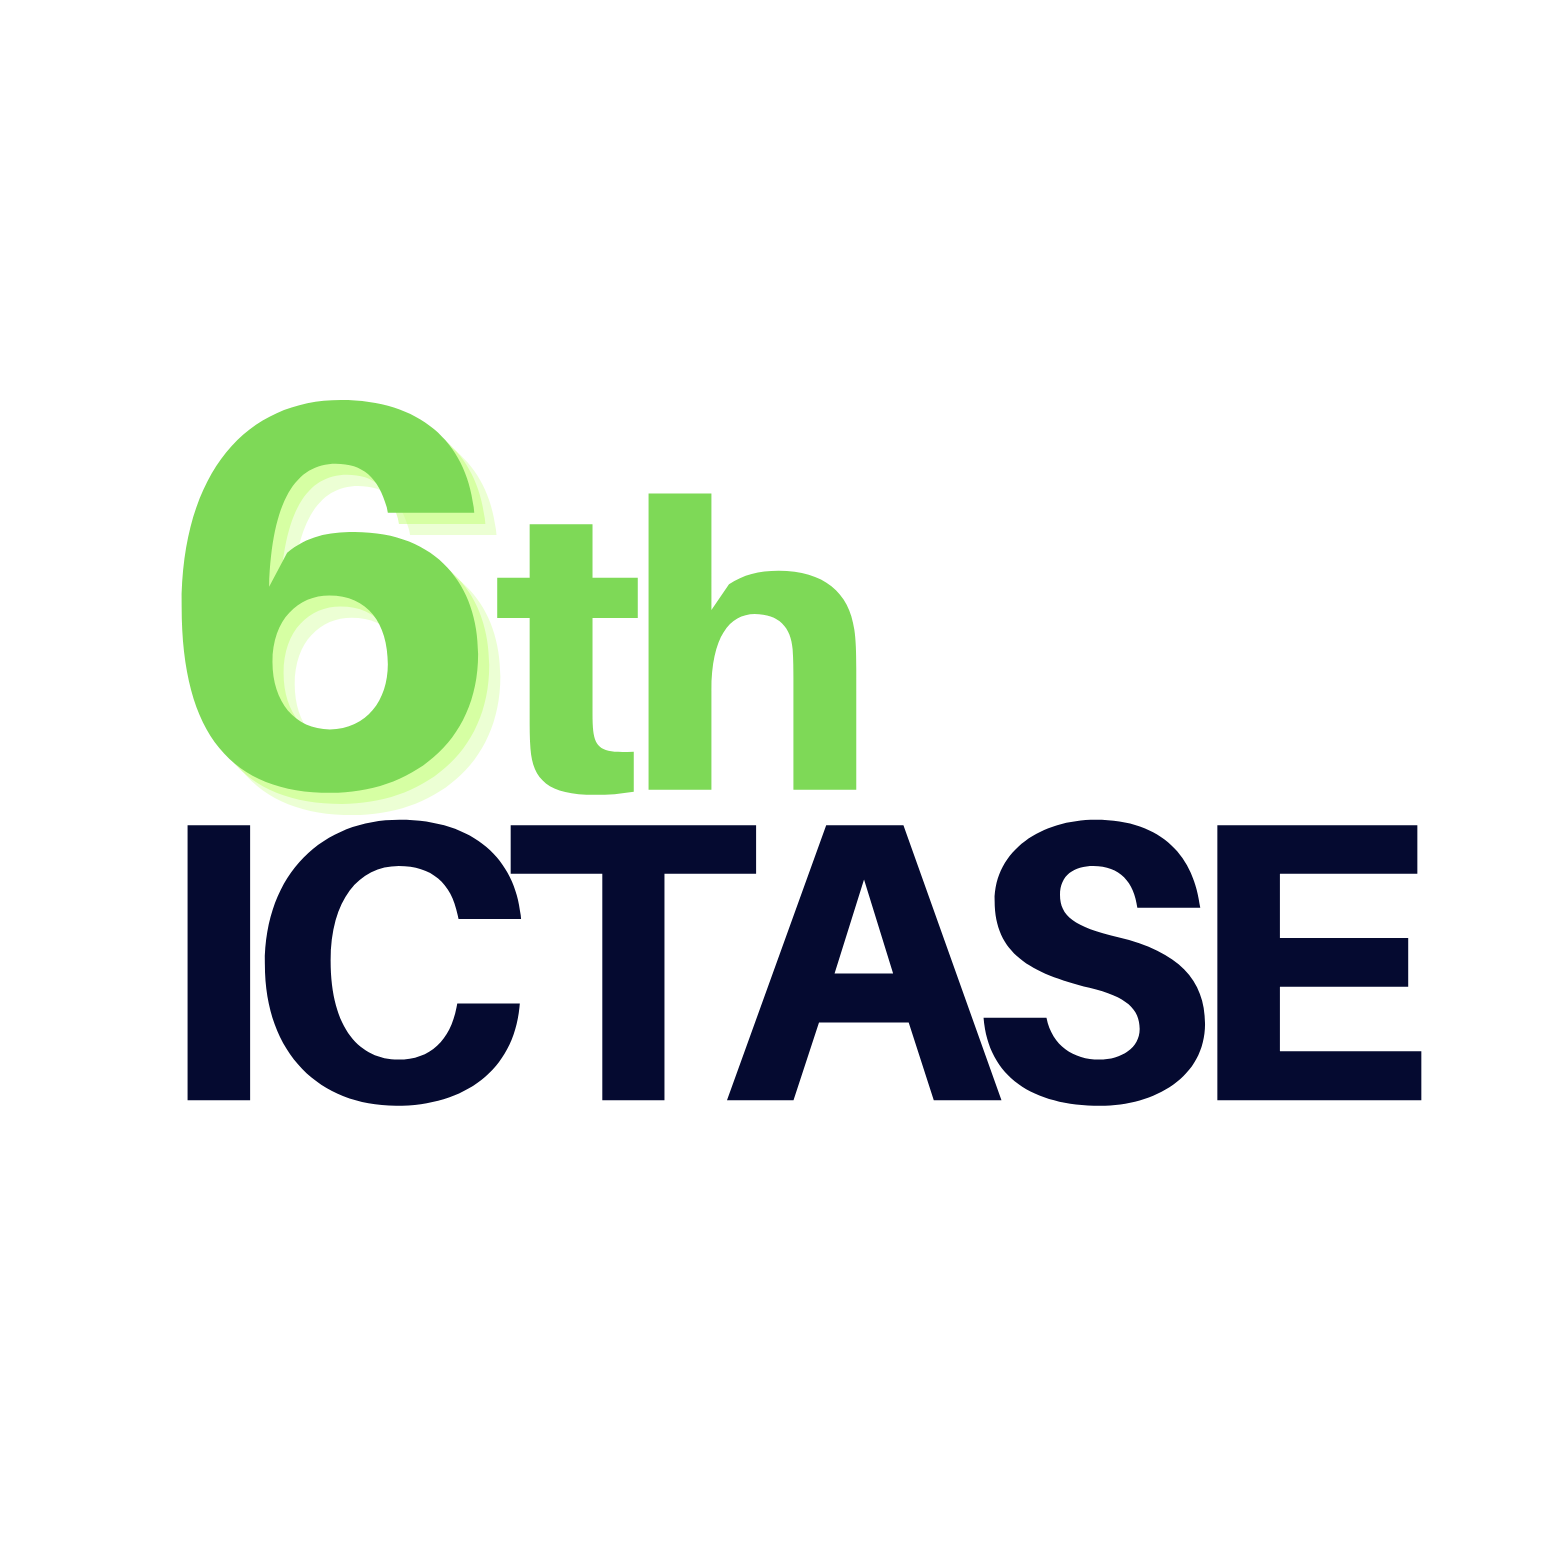 ICTASE (International Conference on Teaching and Science Education)